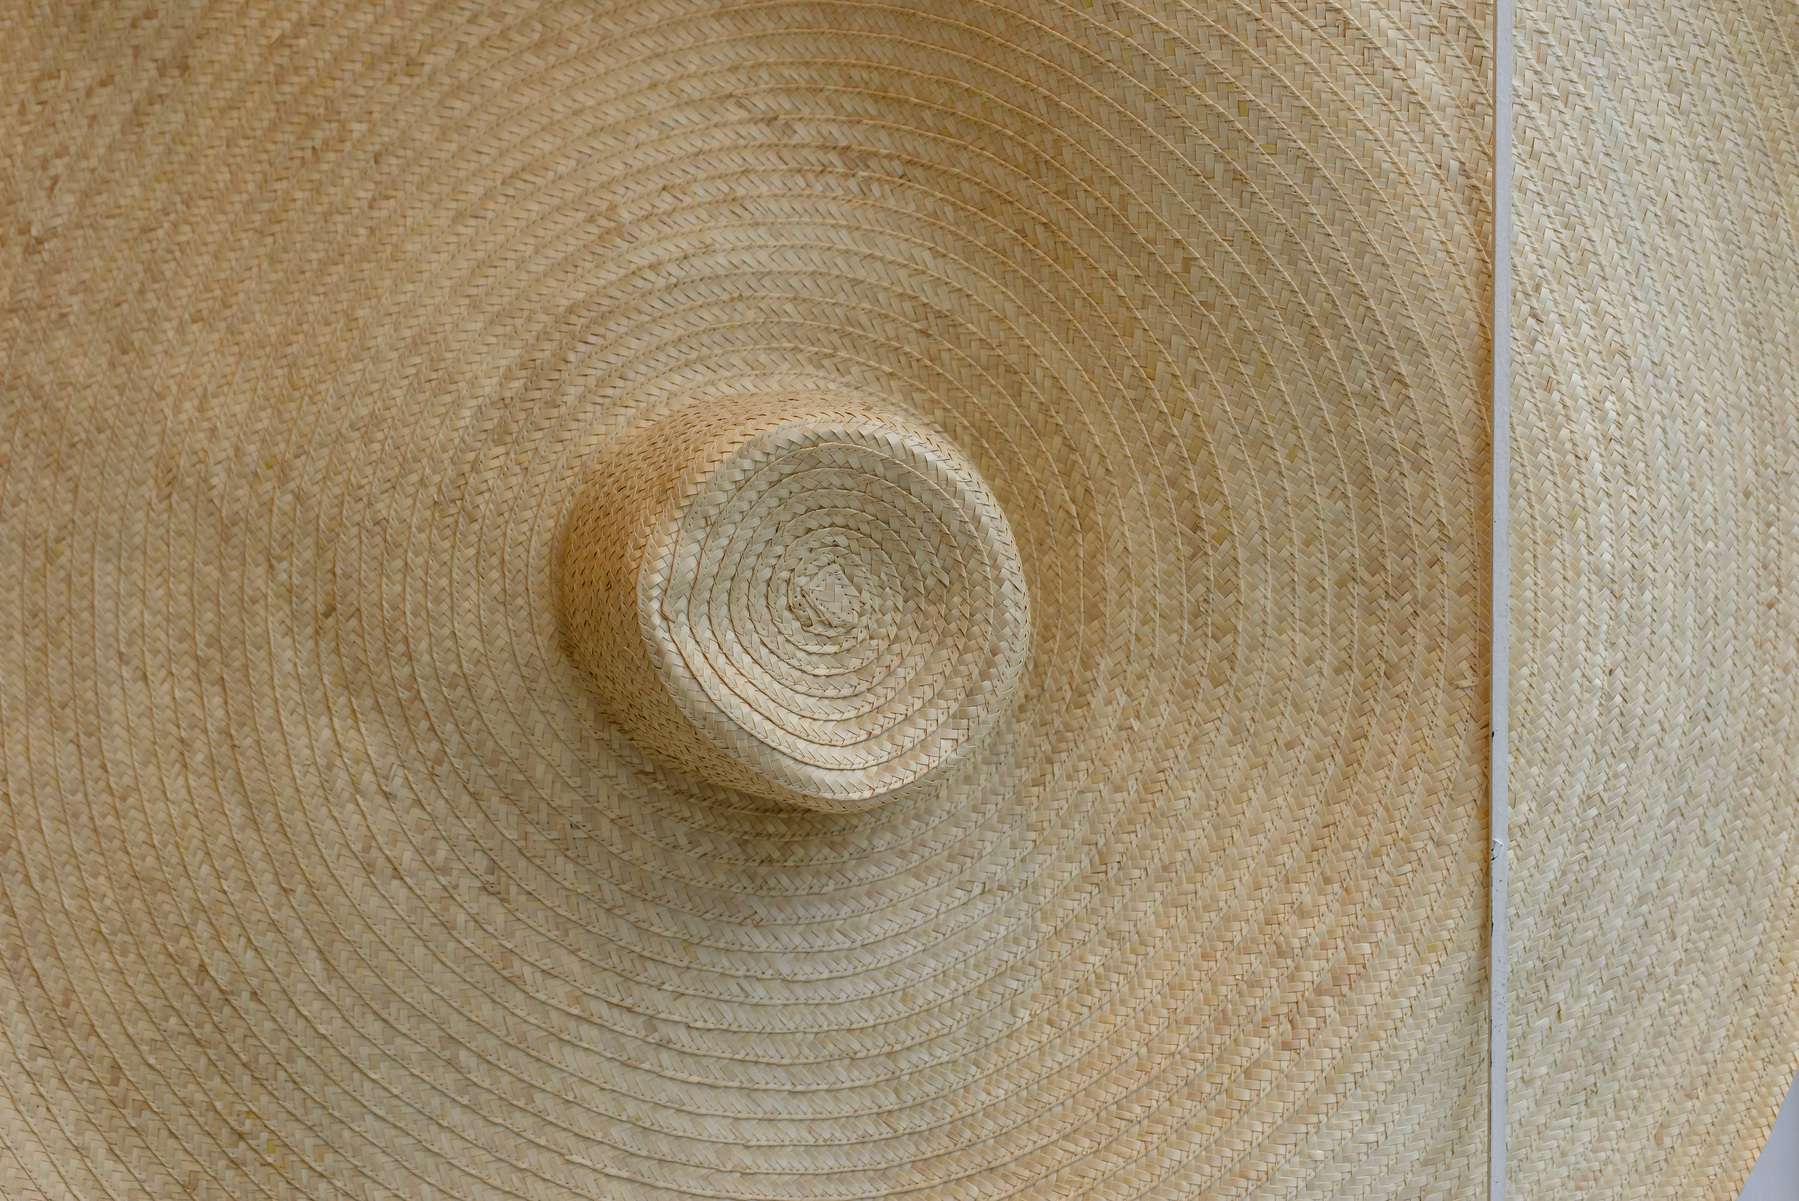 closeup of a straw hat with very wide brim, hat crown in the middle of frame, brim radiating beyond all the edges of the frame